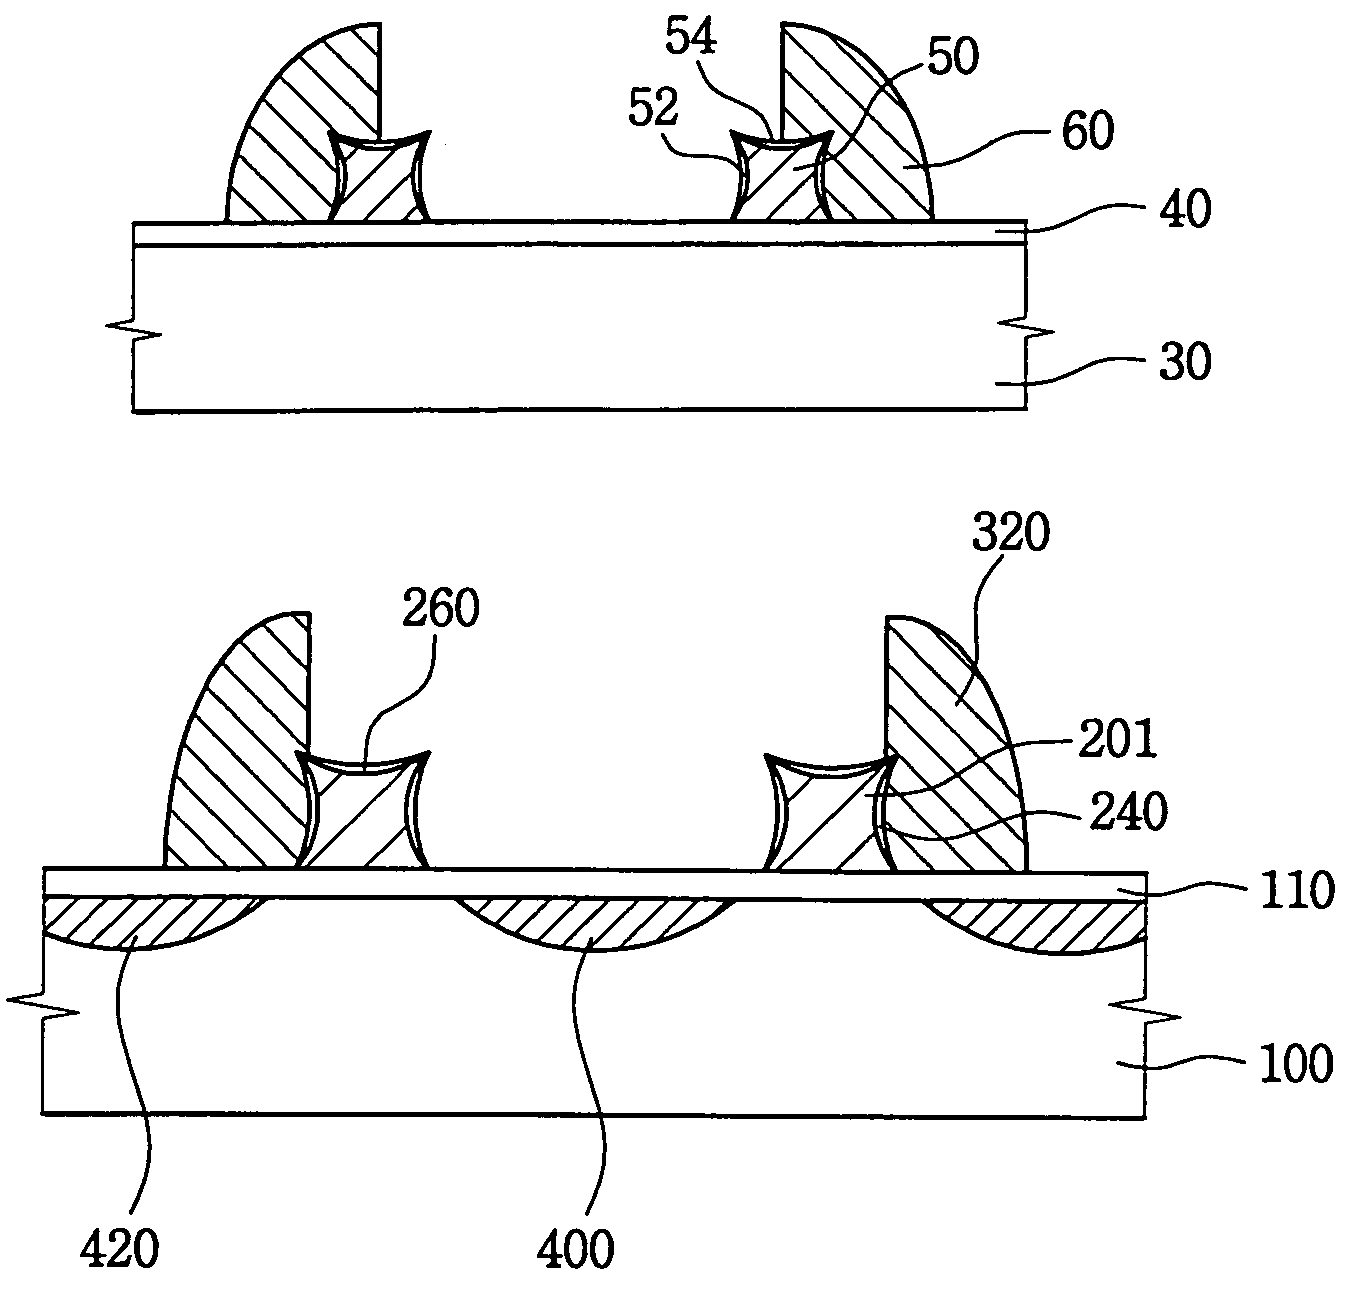 Method of manufacturing a floating gate and method of manufacturing a non-volatile semiconductor memory device comprising the same